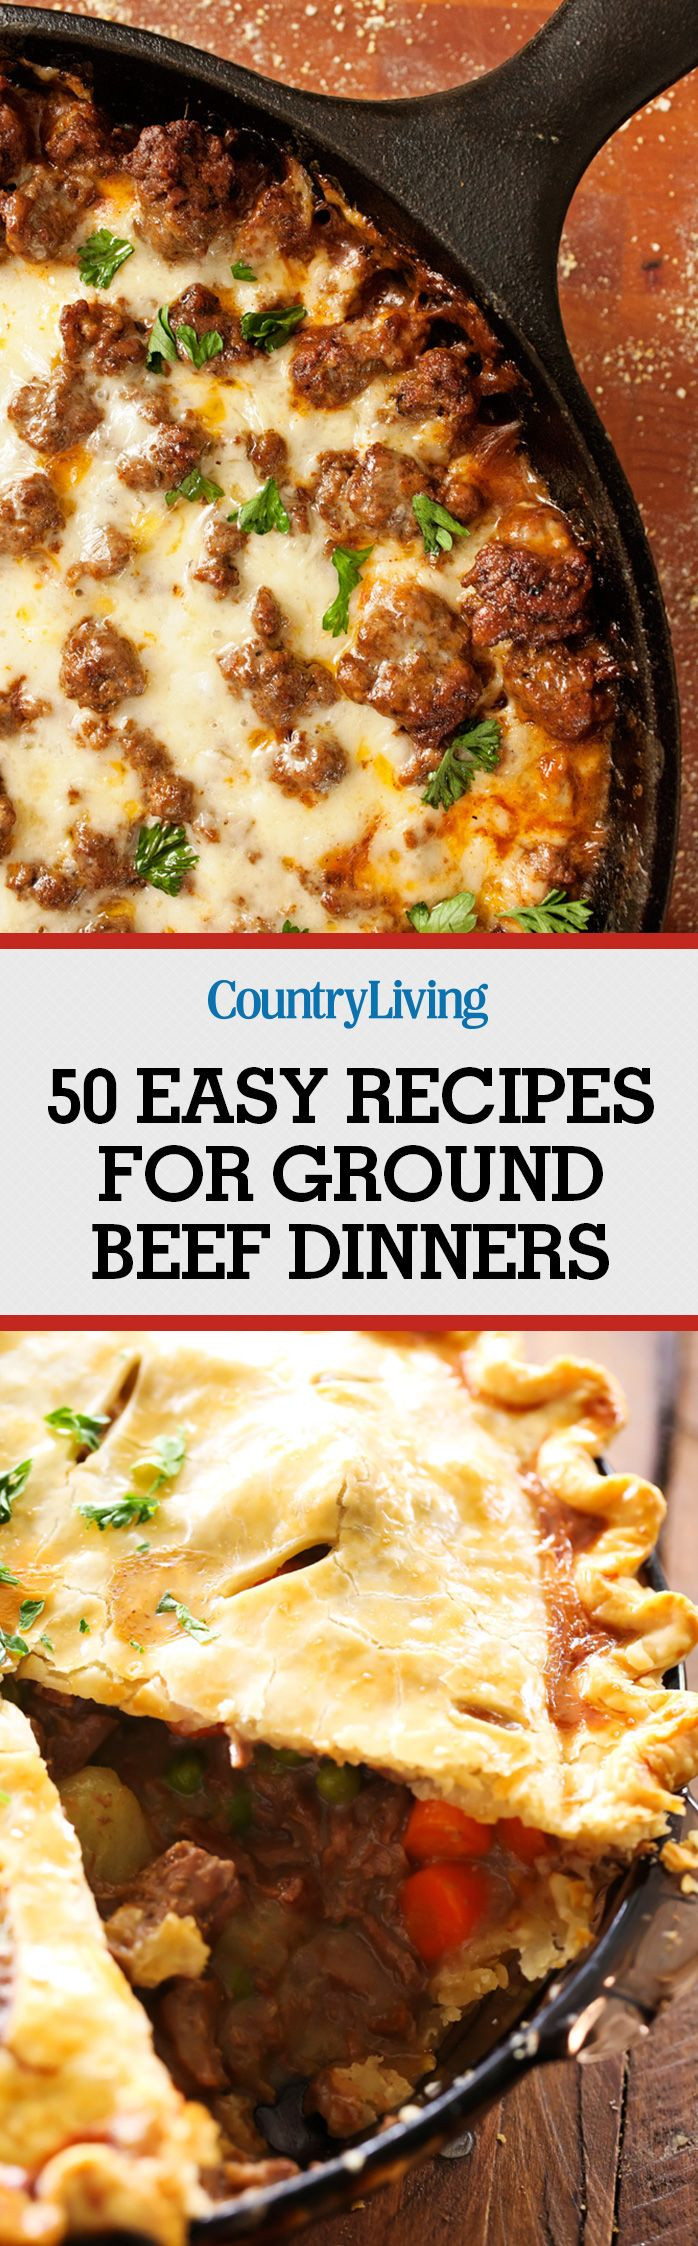 Easy Ground Beef Dinner Ideas
 50 Easy Recipes for Ground Beef Dinners